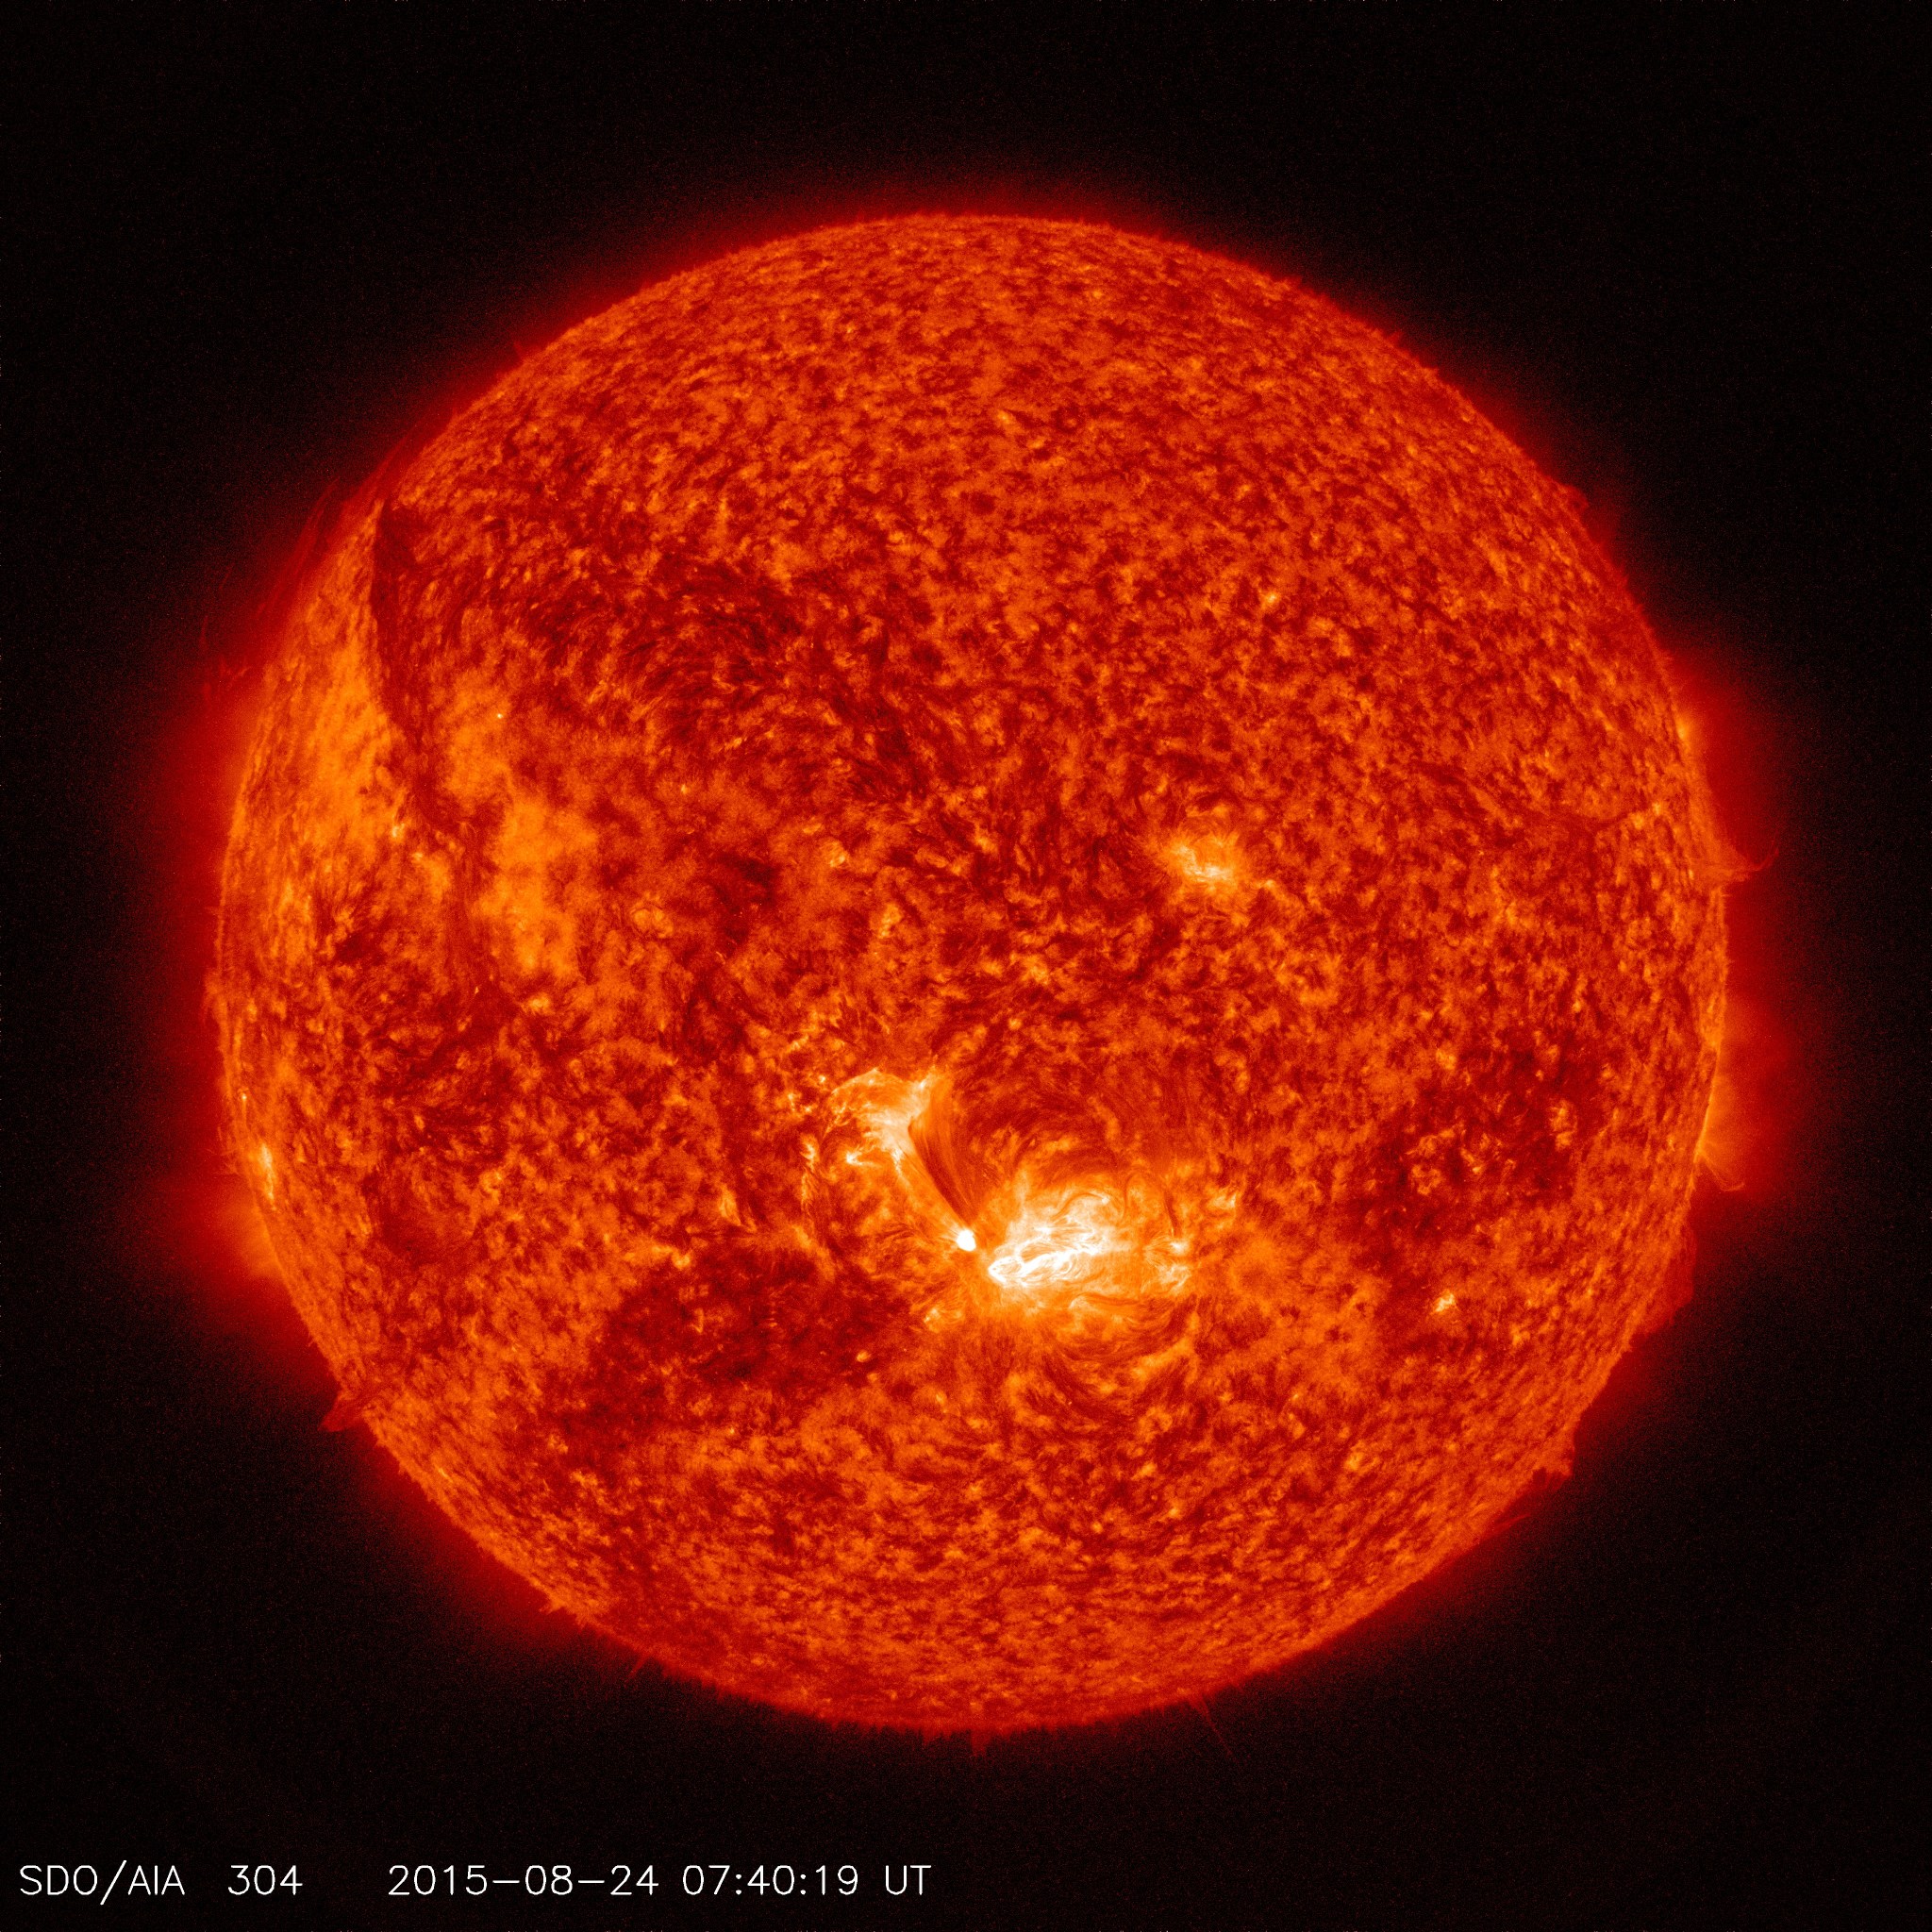 SDO captured this image of an M5.6-class solar flare on Aug. 24, 2015